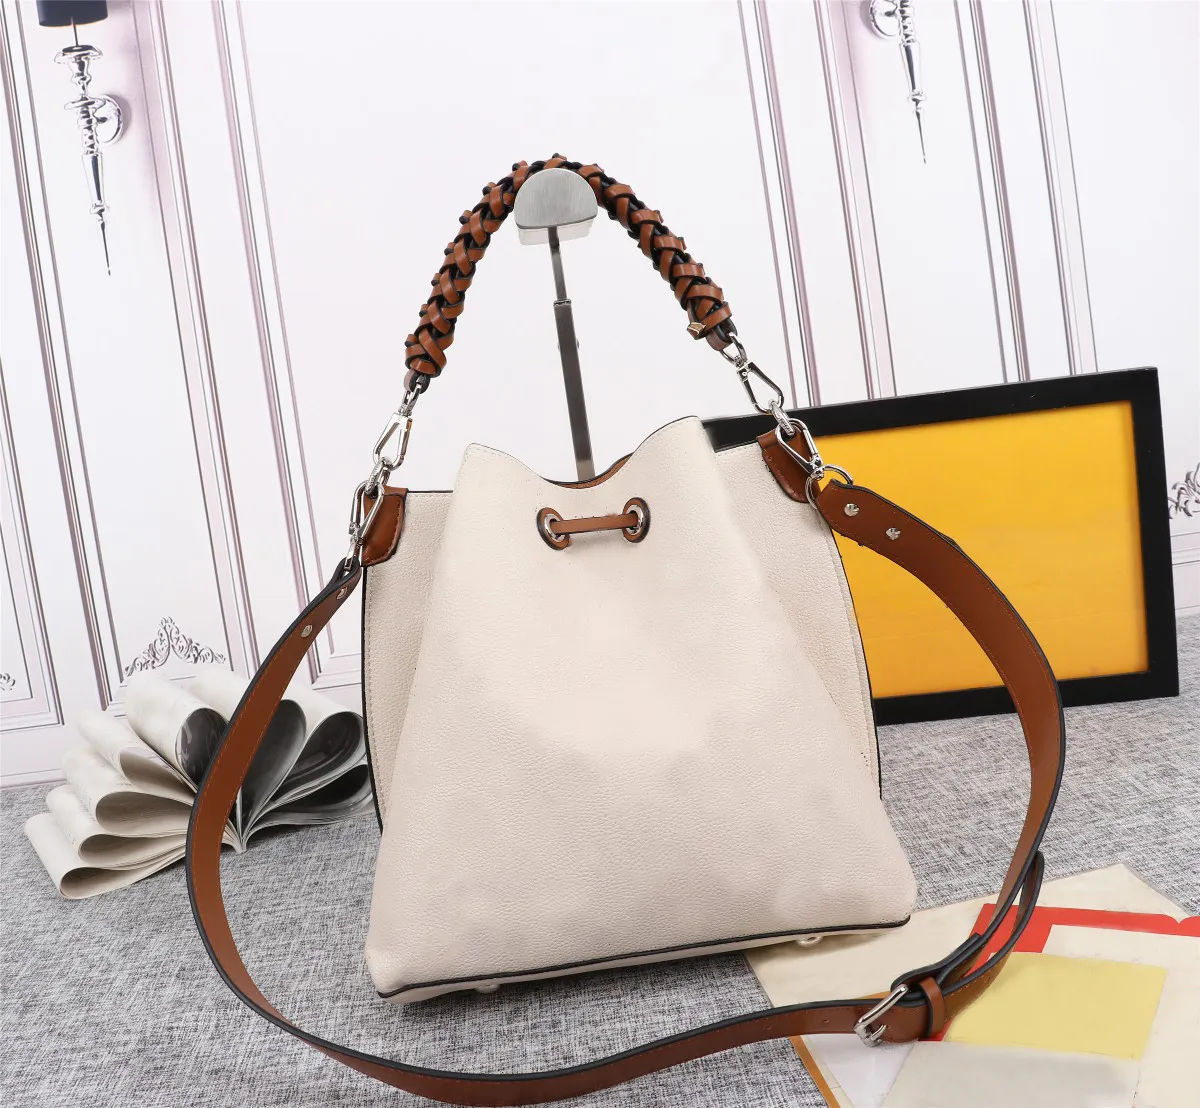 Fashion Marmont Ophidia Muria Bucket bag alphabet pattern Satchel Shoulder Bag Chain Handbags Crossbody Purse Lady Leather Classic Style Tote Backpack